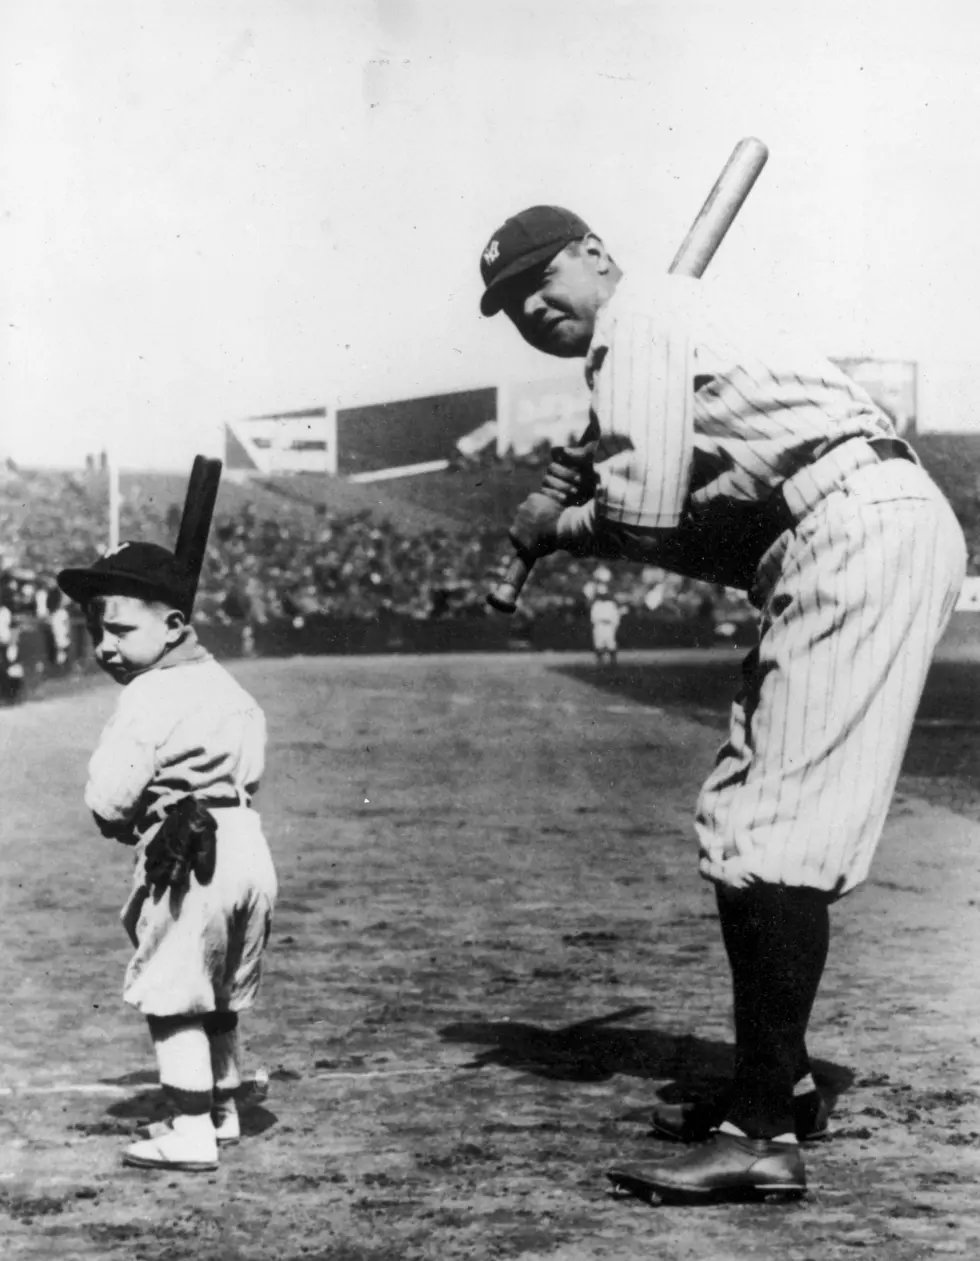 MLB Short On Remembering Contributions Of The Babe